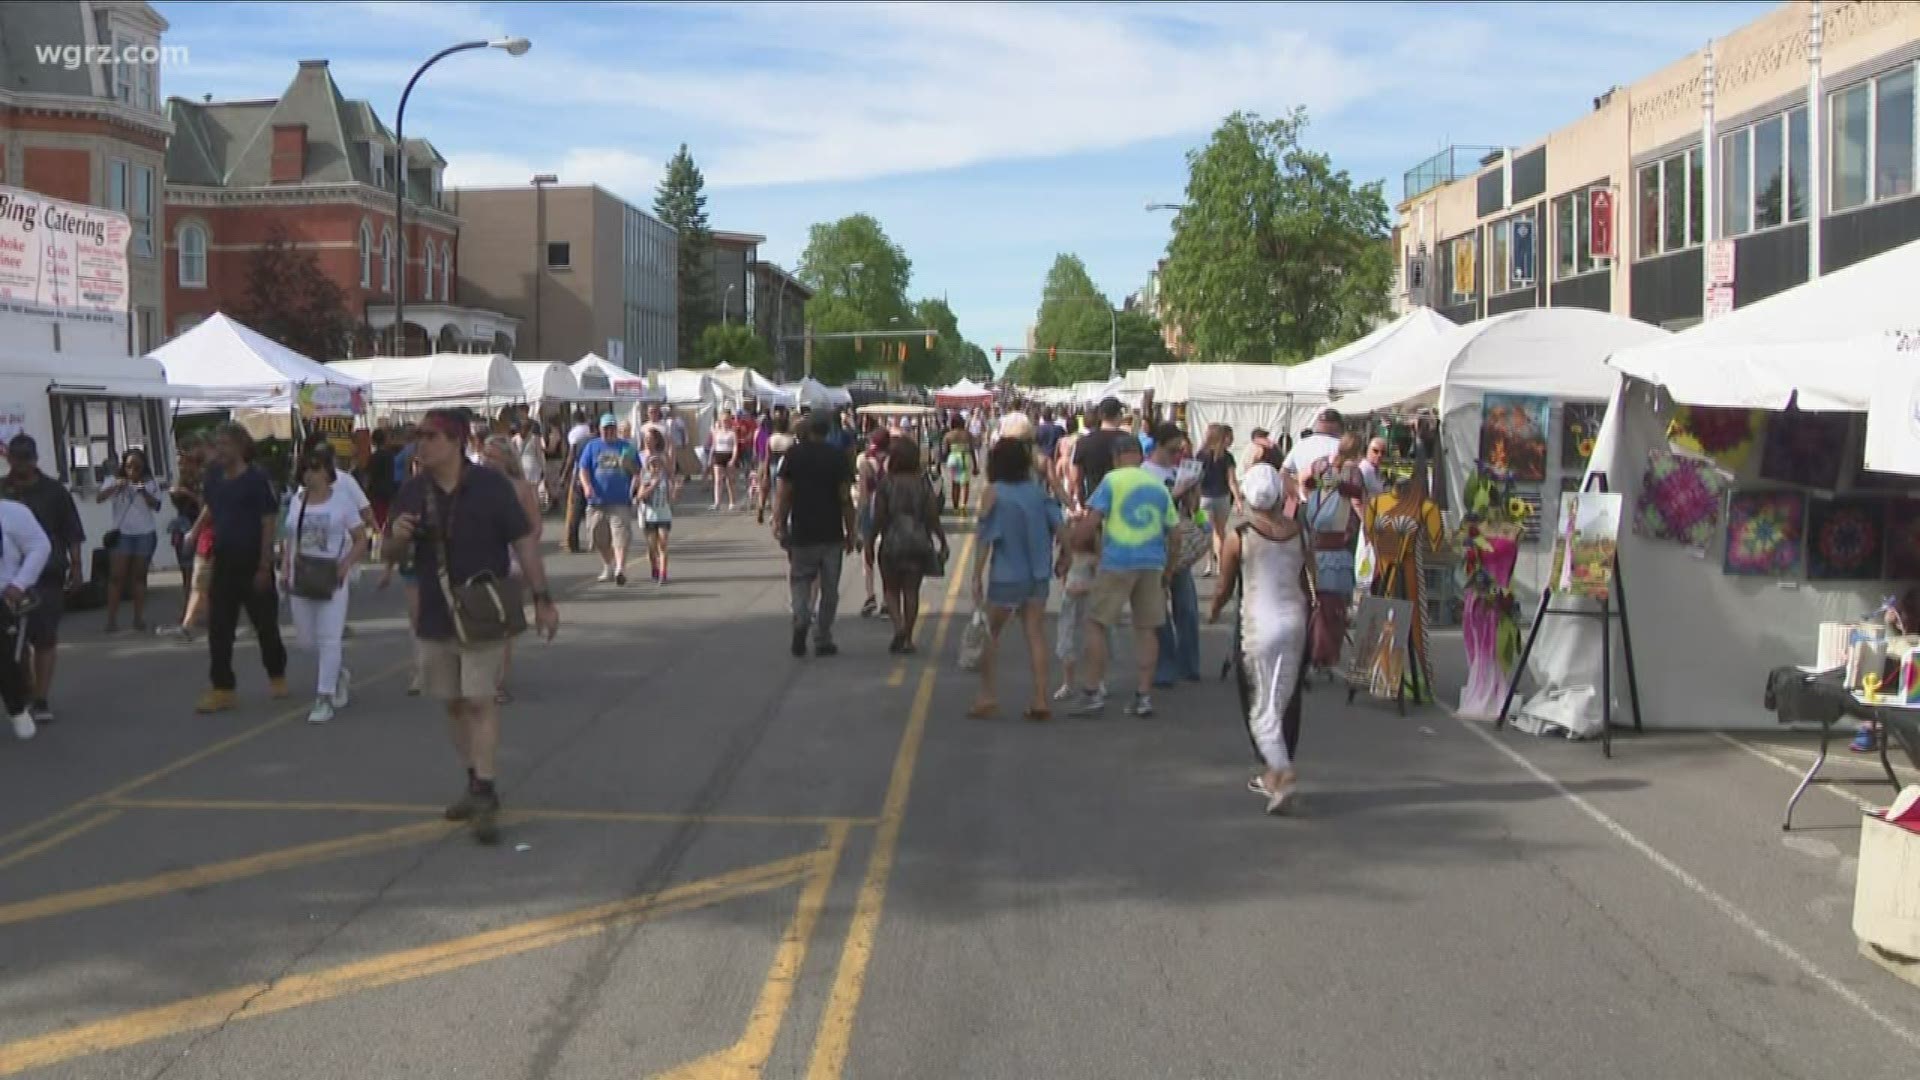 The announcement was made just a couple of hours ago on its Facebook page, canceling one of buffalo's largest festivals, which was set for June.